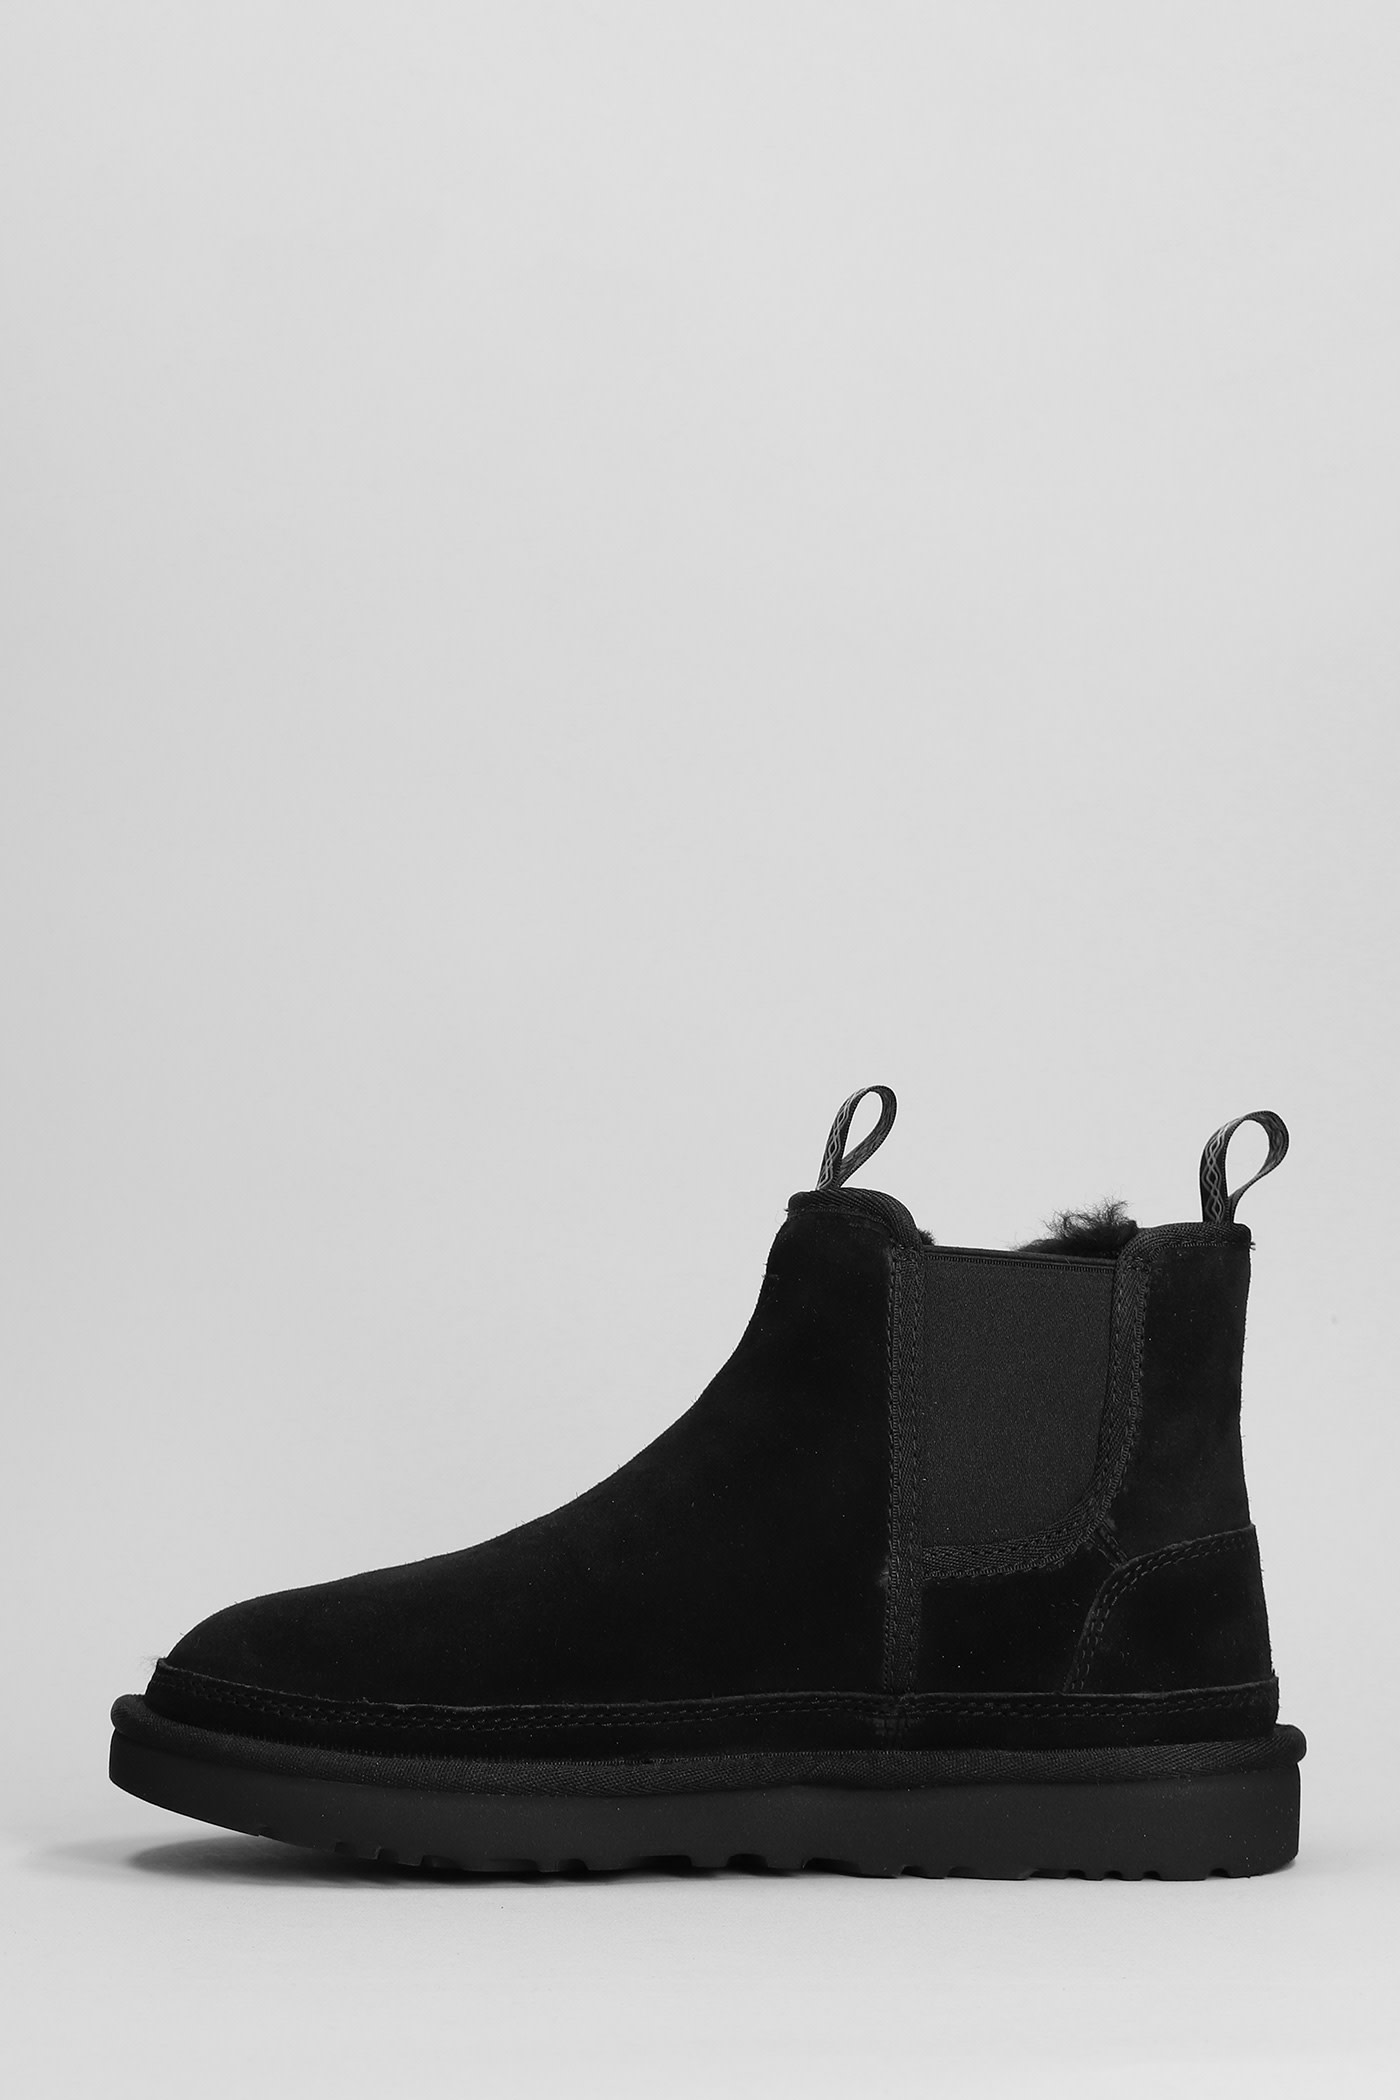 UGG x COTD Neuml lace-up Boots - Farfetch